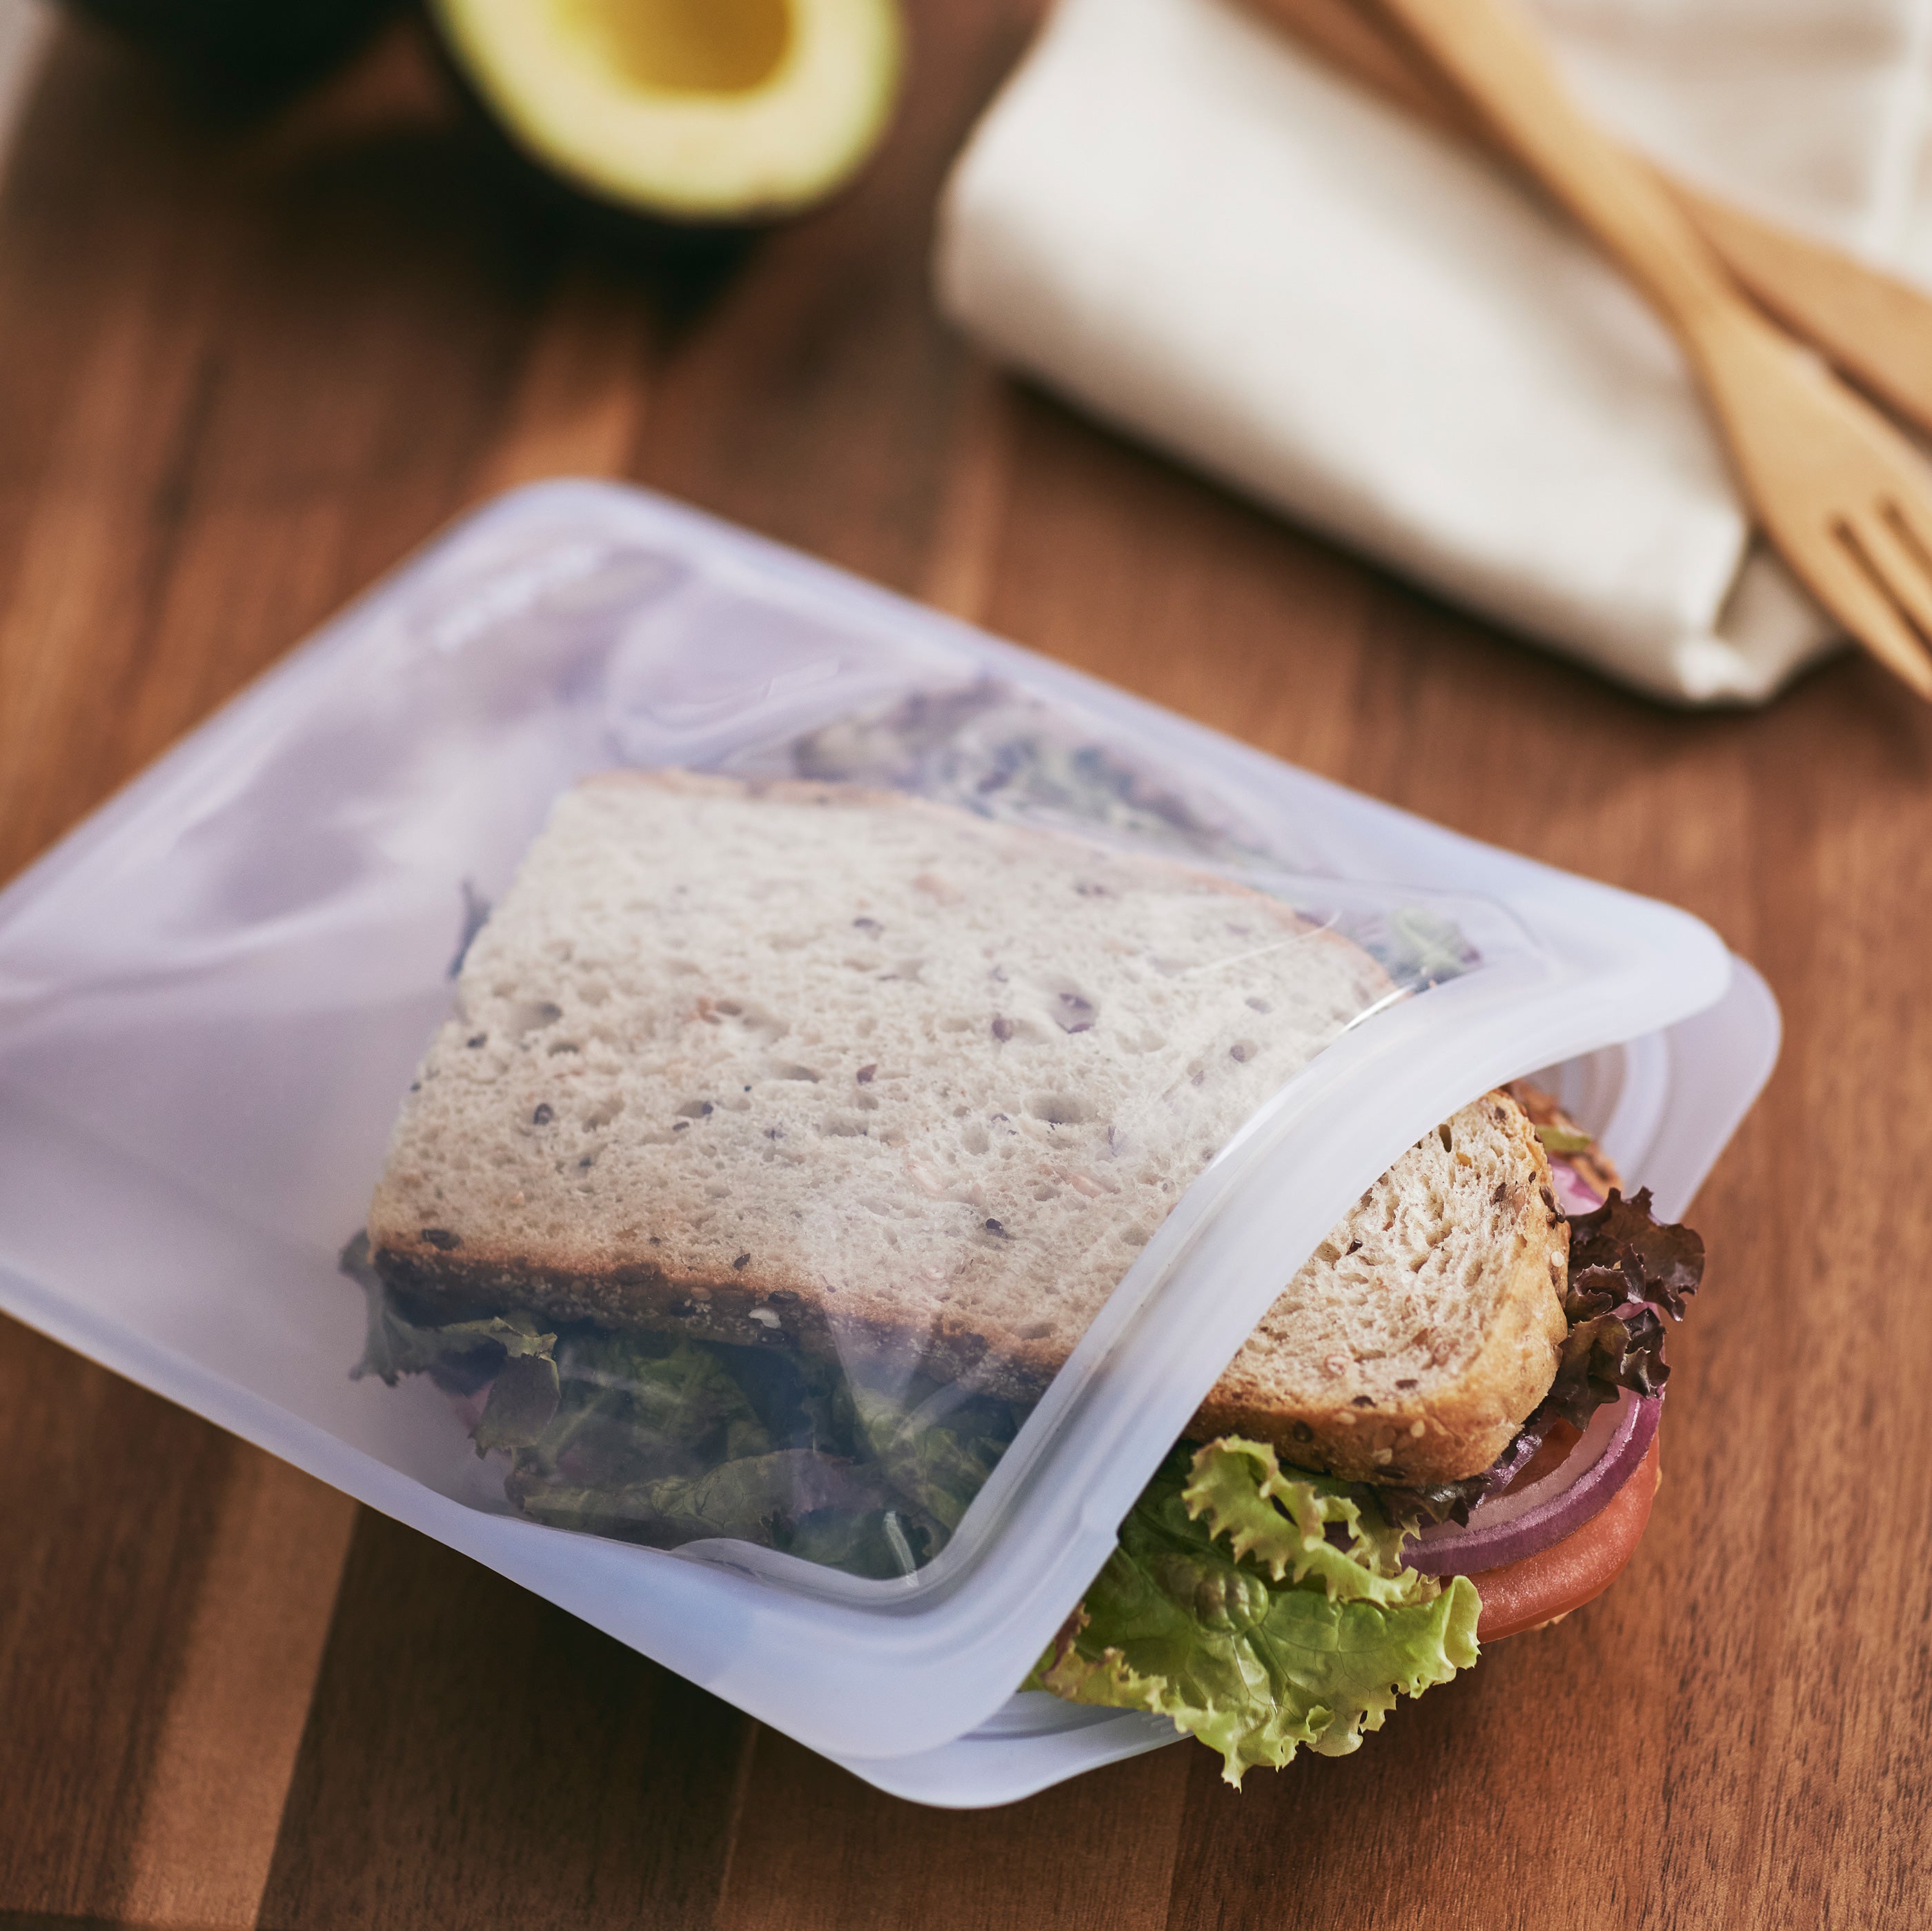 clear/green: Reusable Silicone Stasher Quart Bag Duo With Sandwich